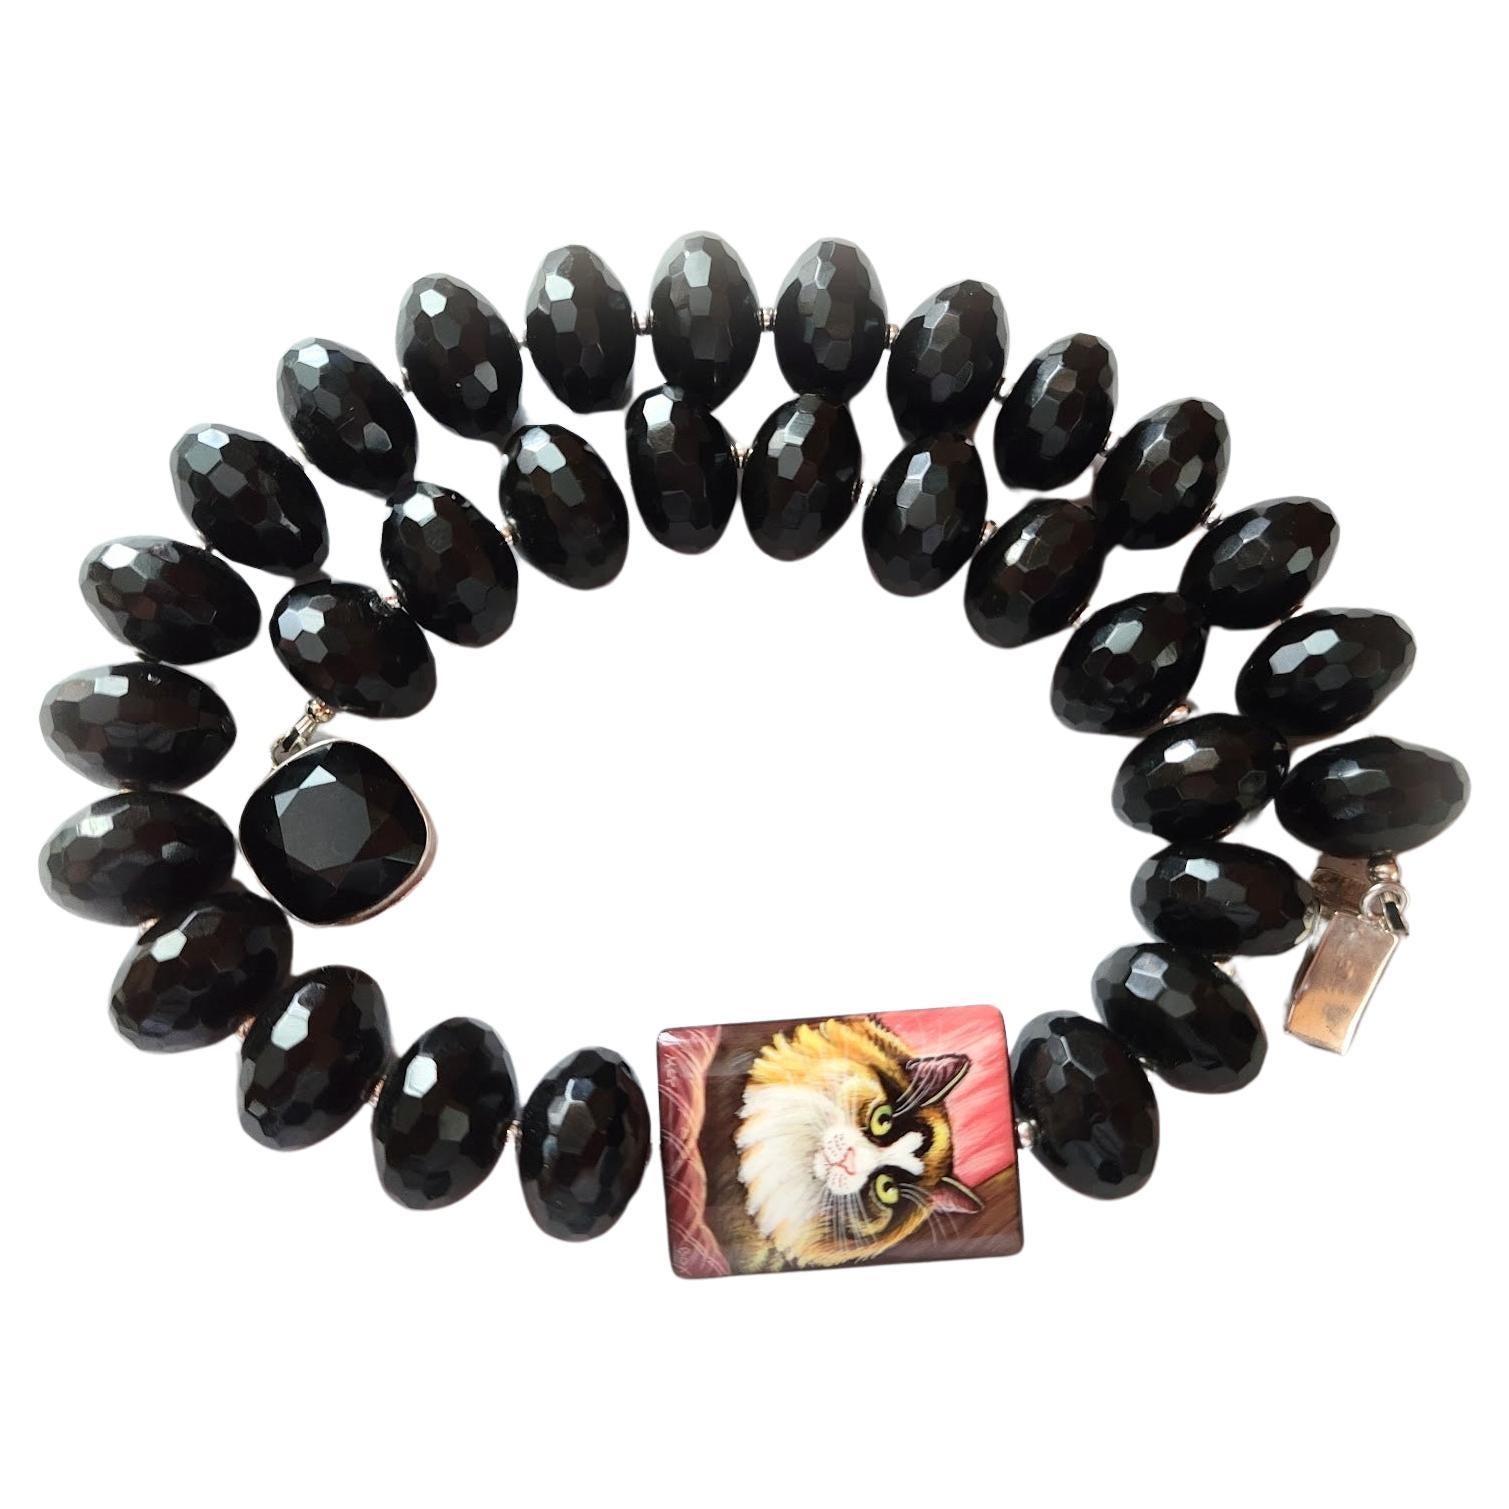 Black Onyx Necklace With Hand Painted Bead On Black Rectangular Agate For Sale